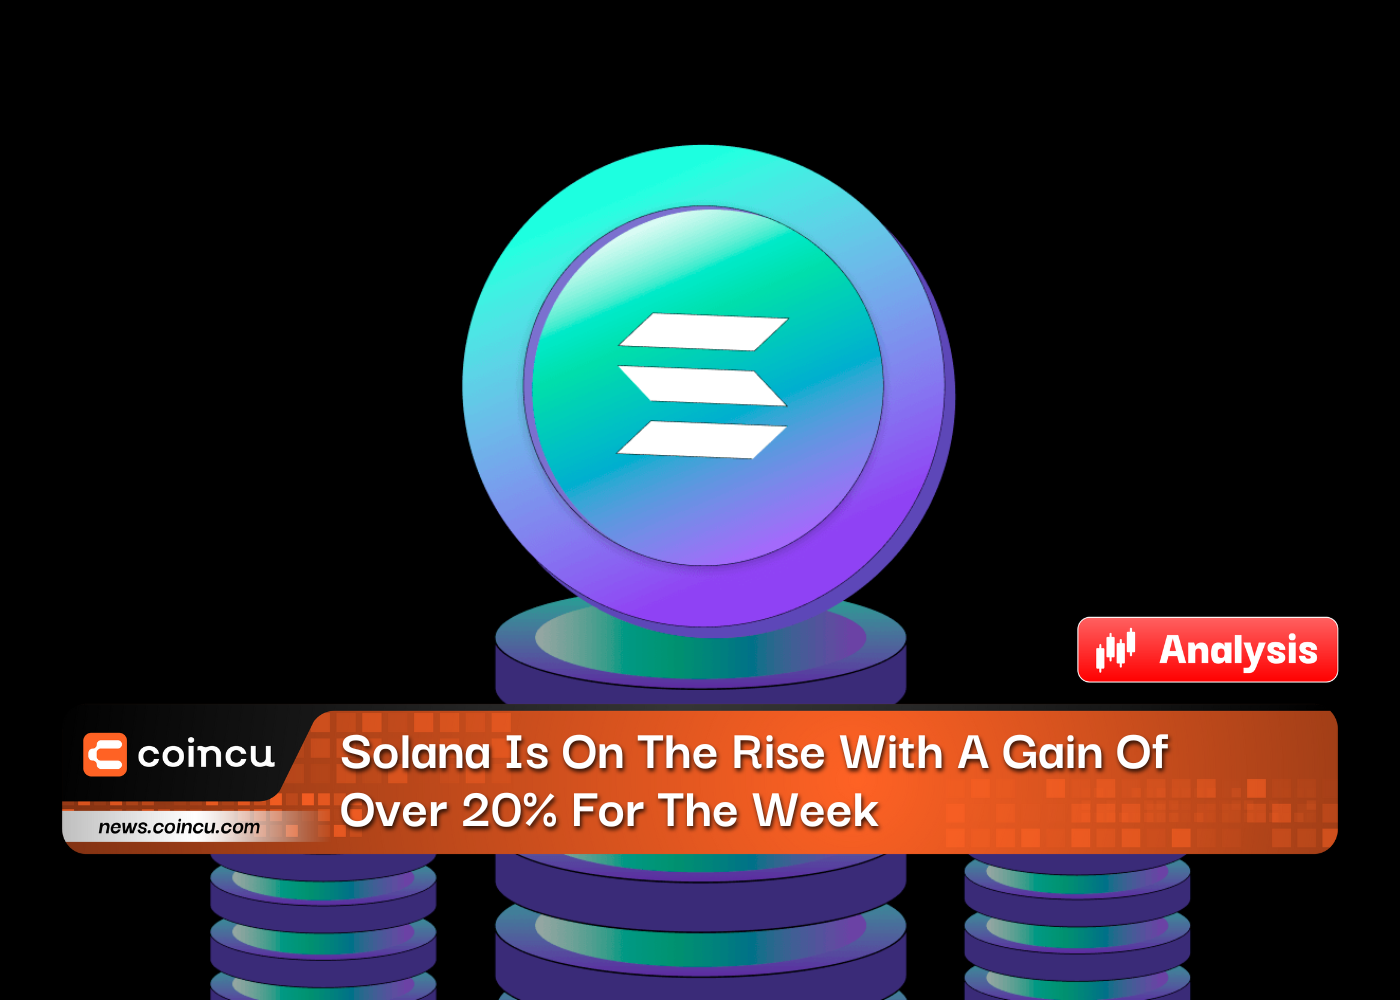 Solana Is On The Rise With A Gain Of Over 20% For The Week